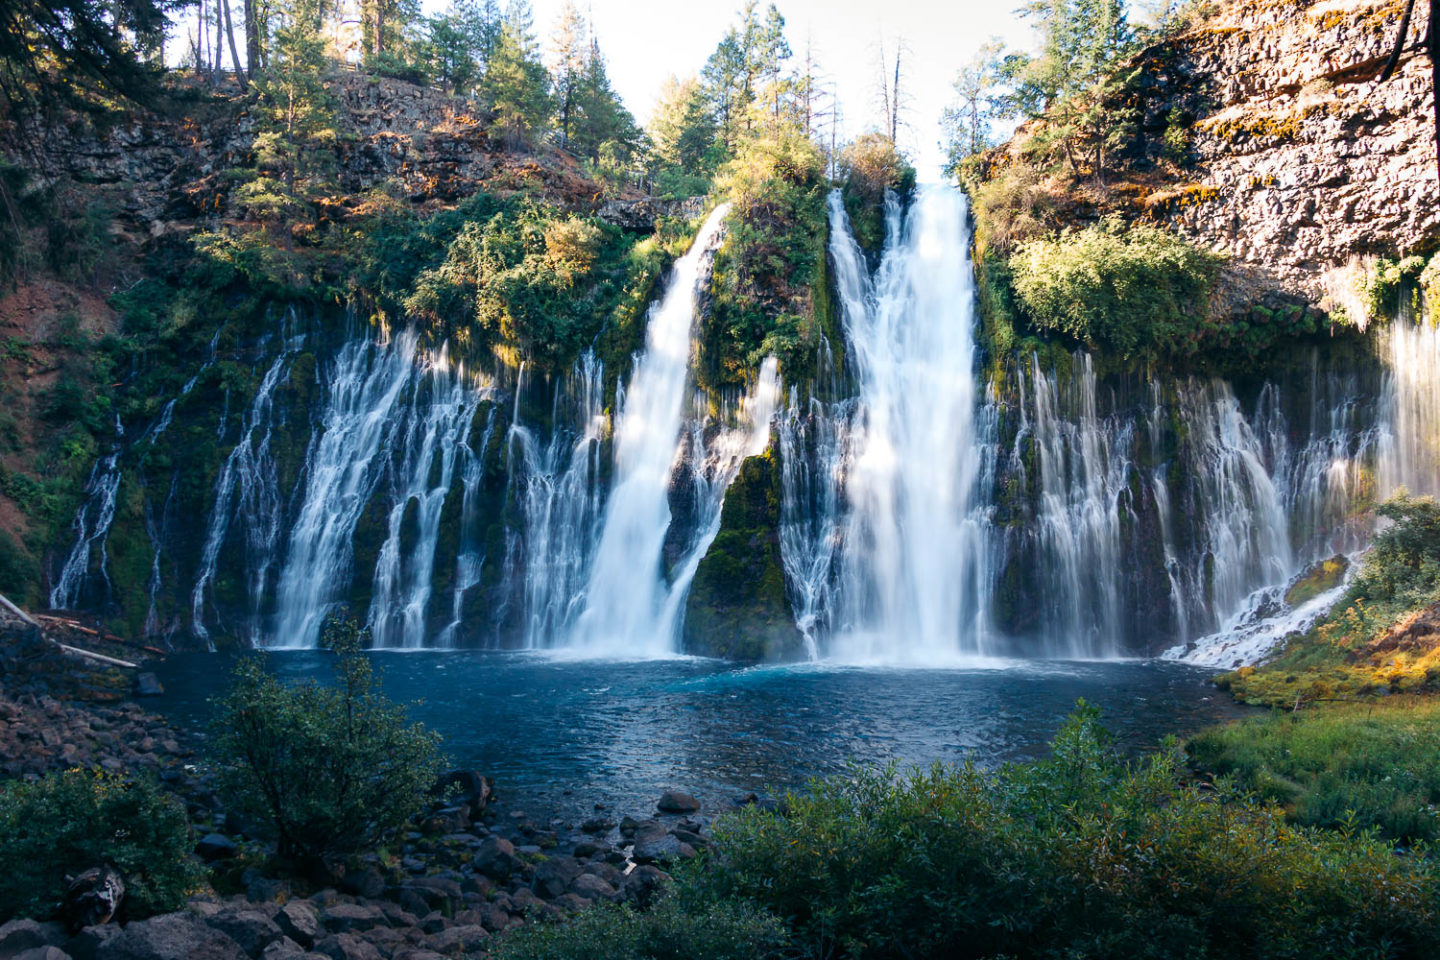 Visit Burney Falls | The most beautiful waterfalls in California - Roads and Destinations